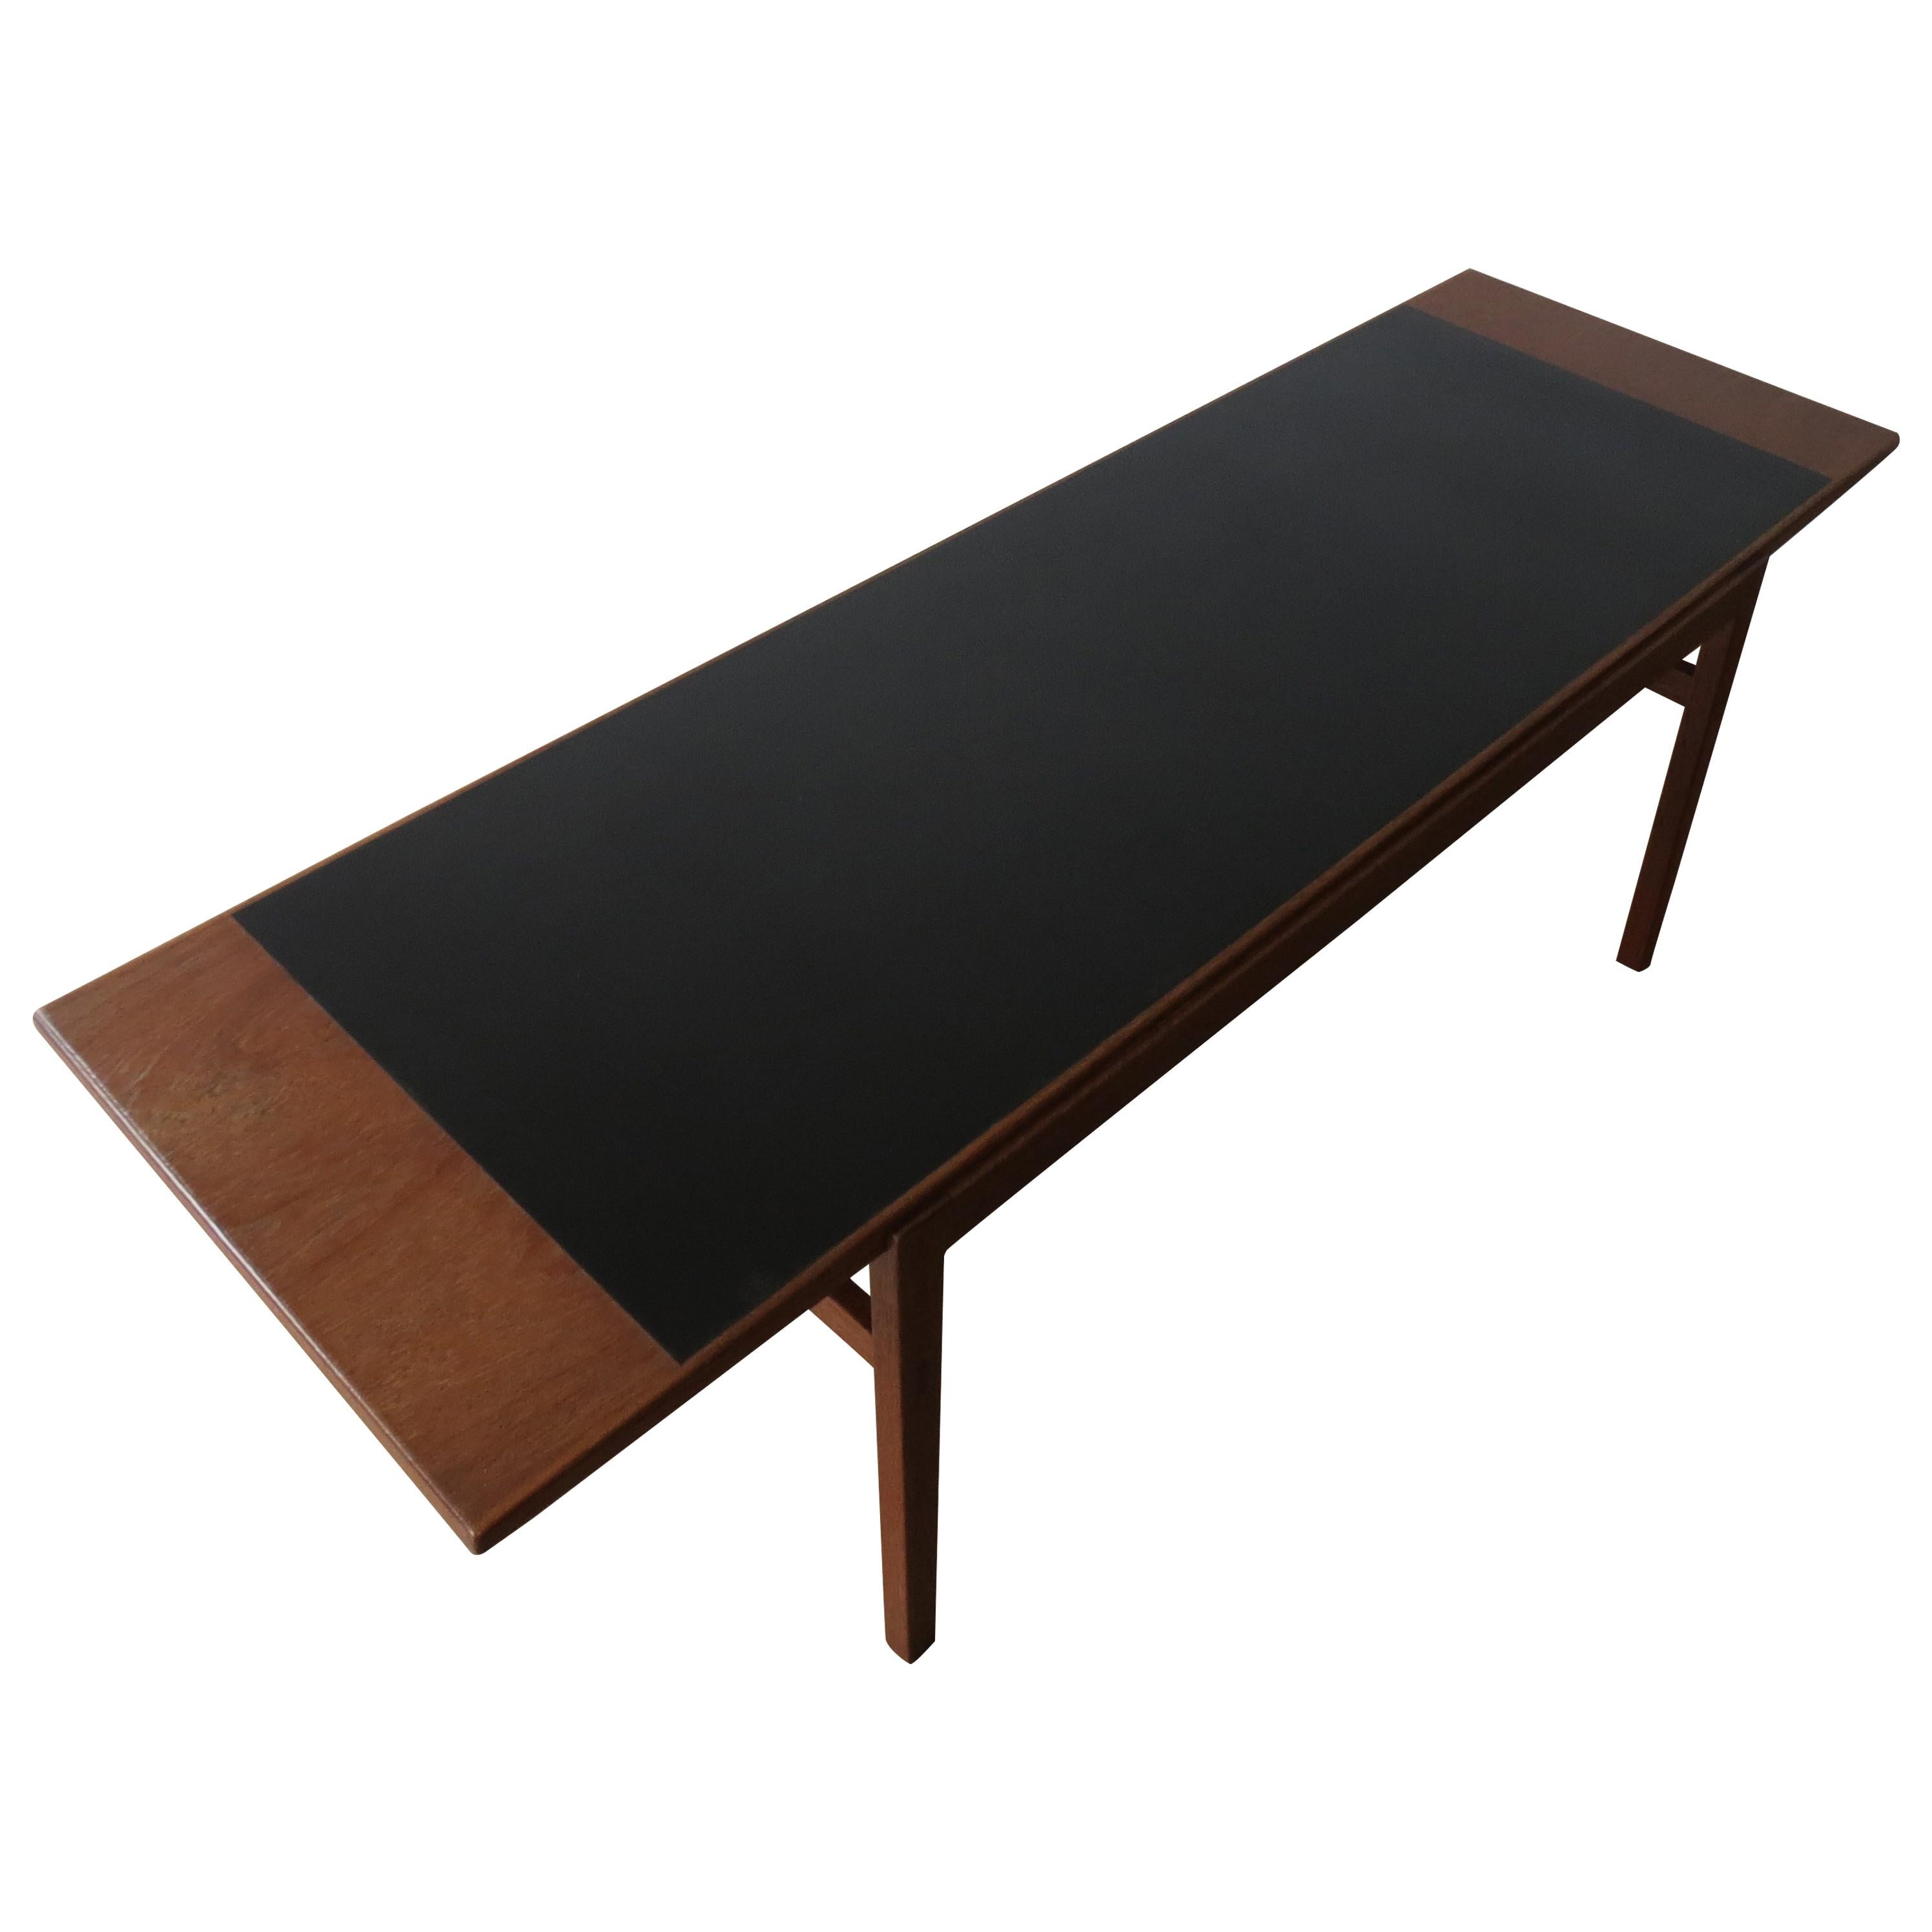 Hand Produced 1960s Teak Coffee Table with Ebonized Top by Alan Peters